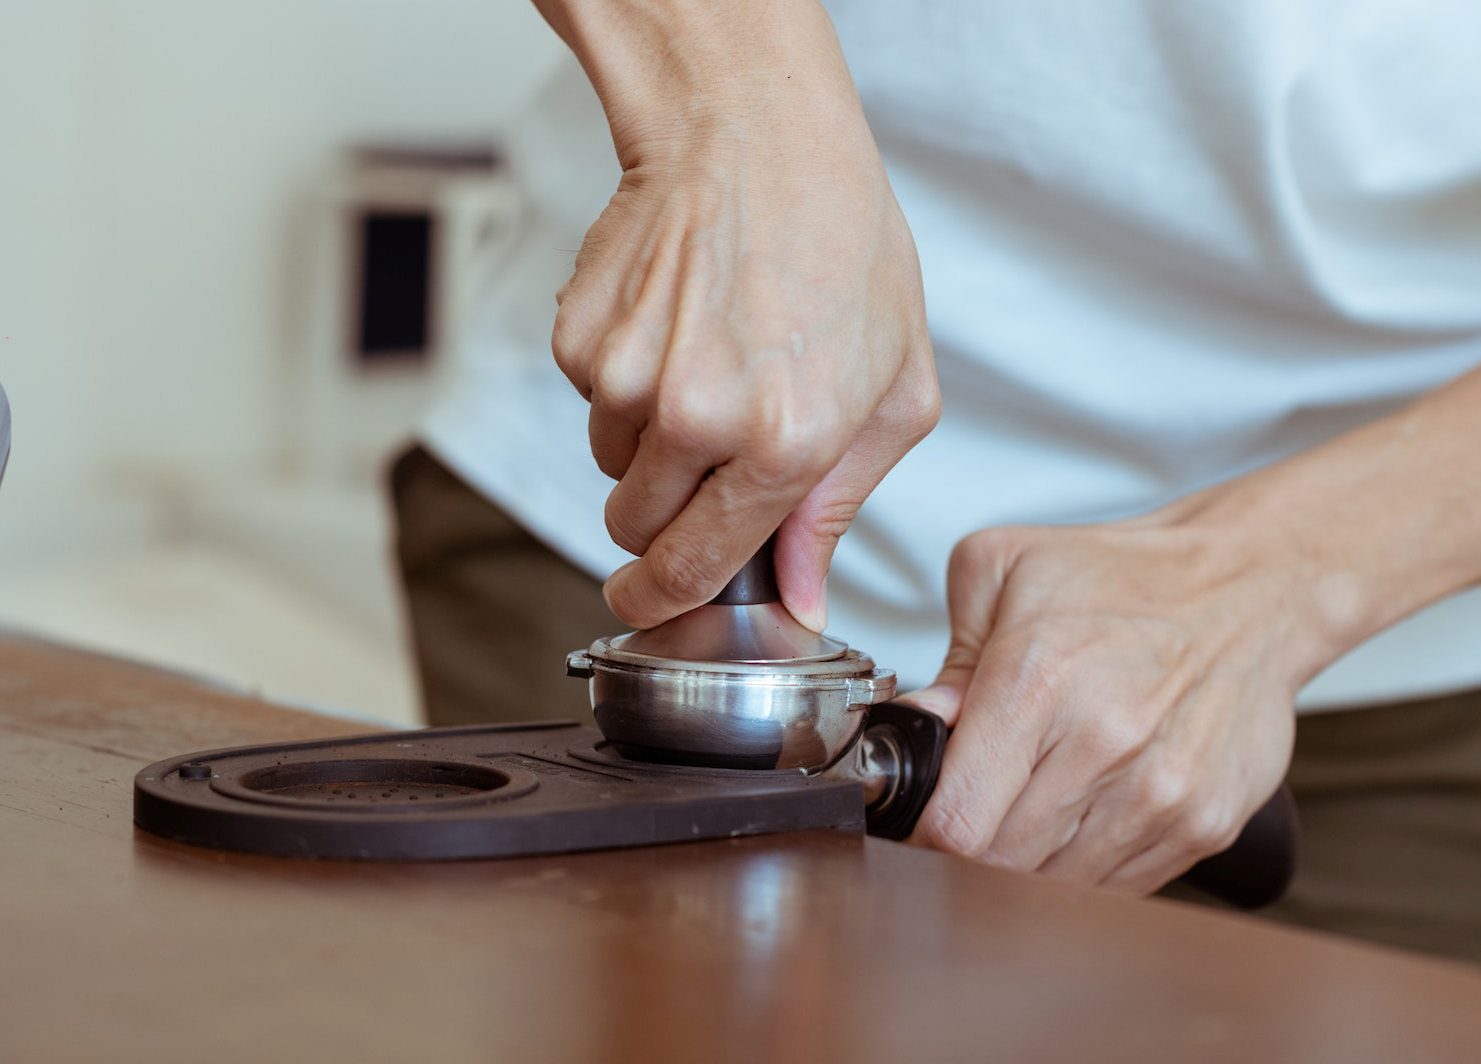 HOW TO PERFECTLY TAMP YOUR ESPRESSO SHOT